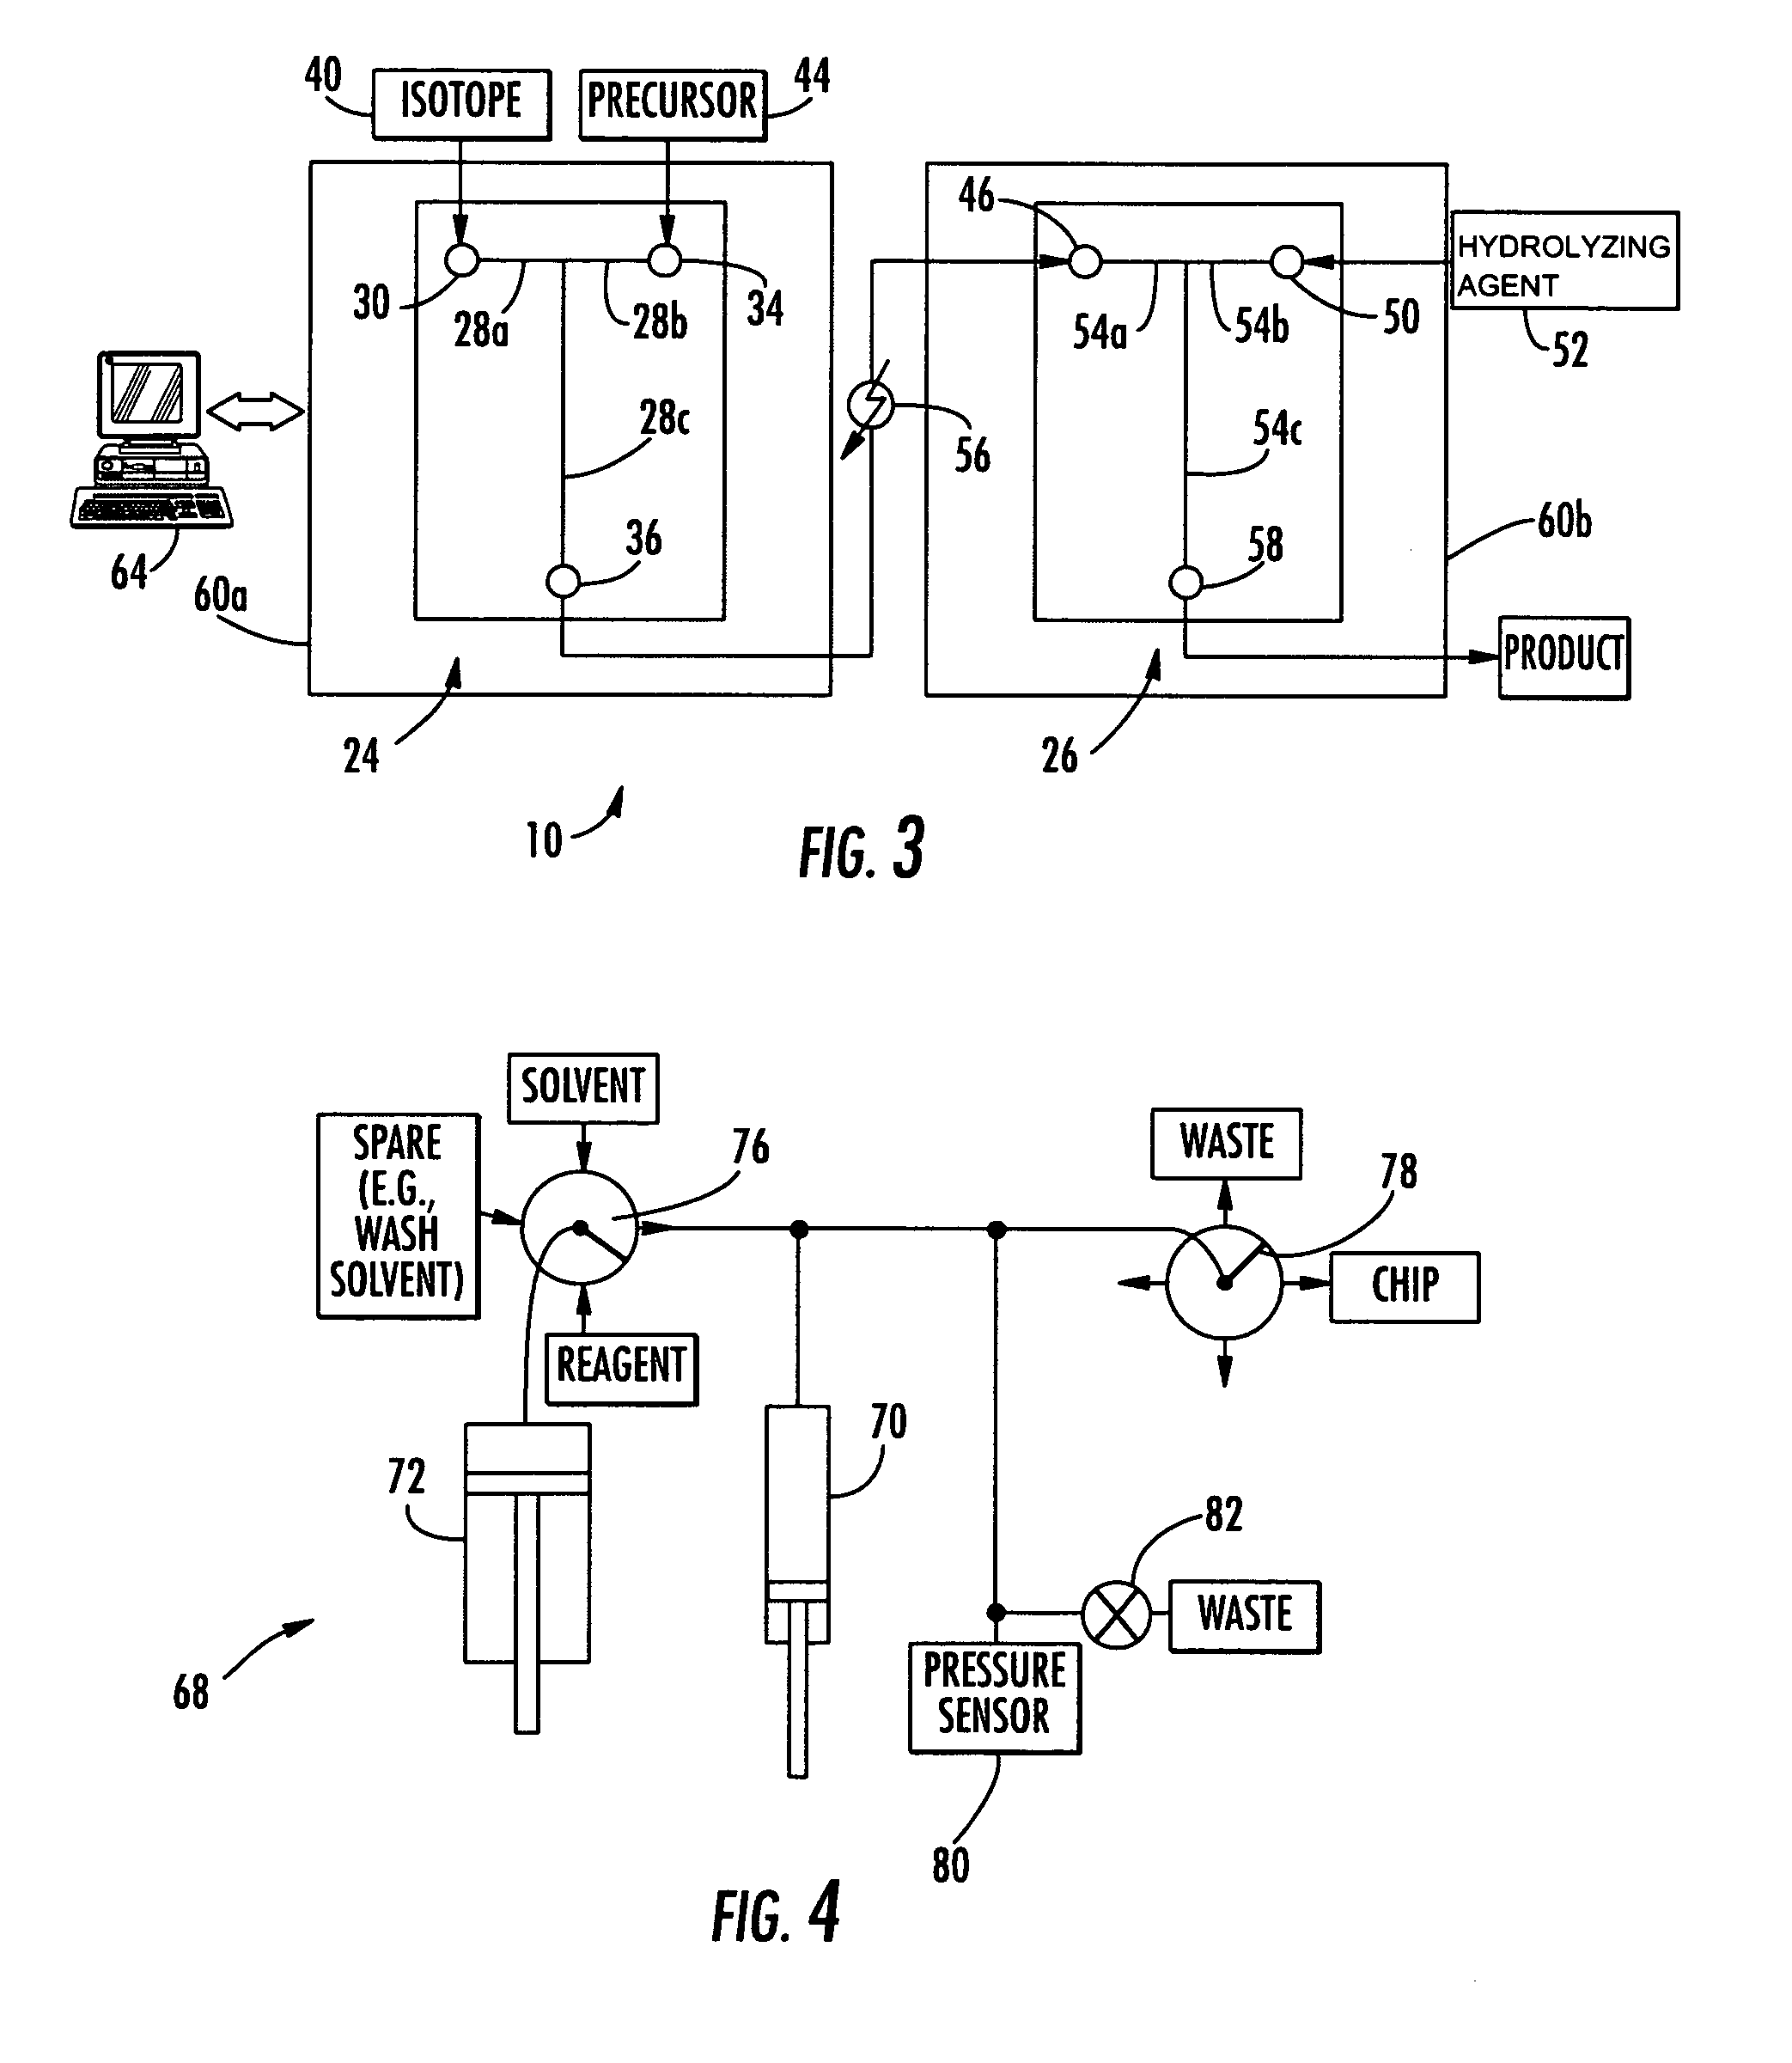 Microfluidic apparatus and method for synthesis of molecular imaging probes including FDG